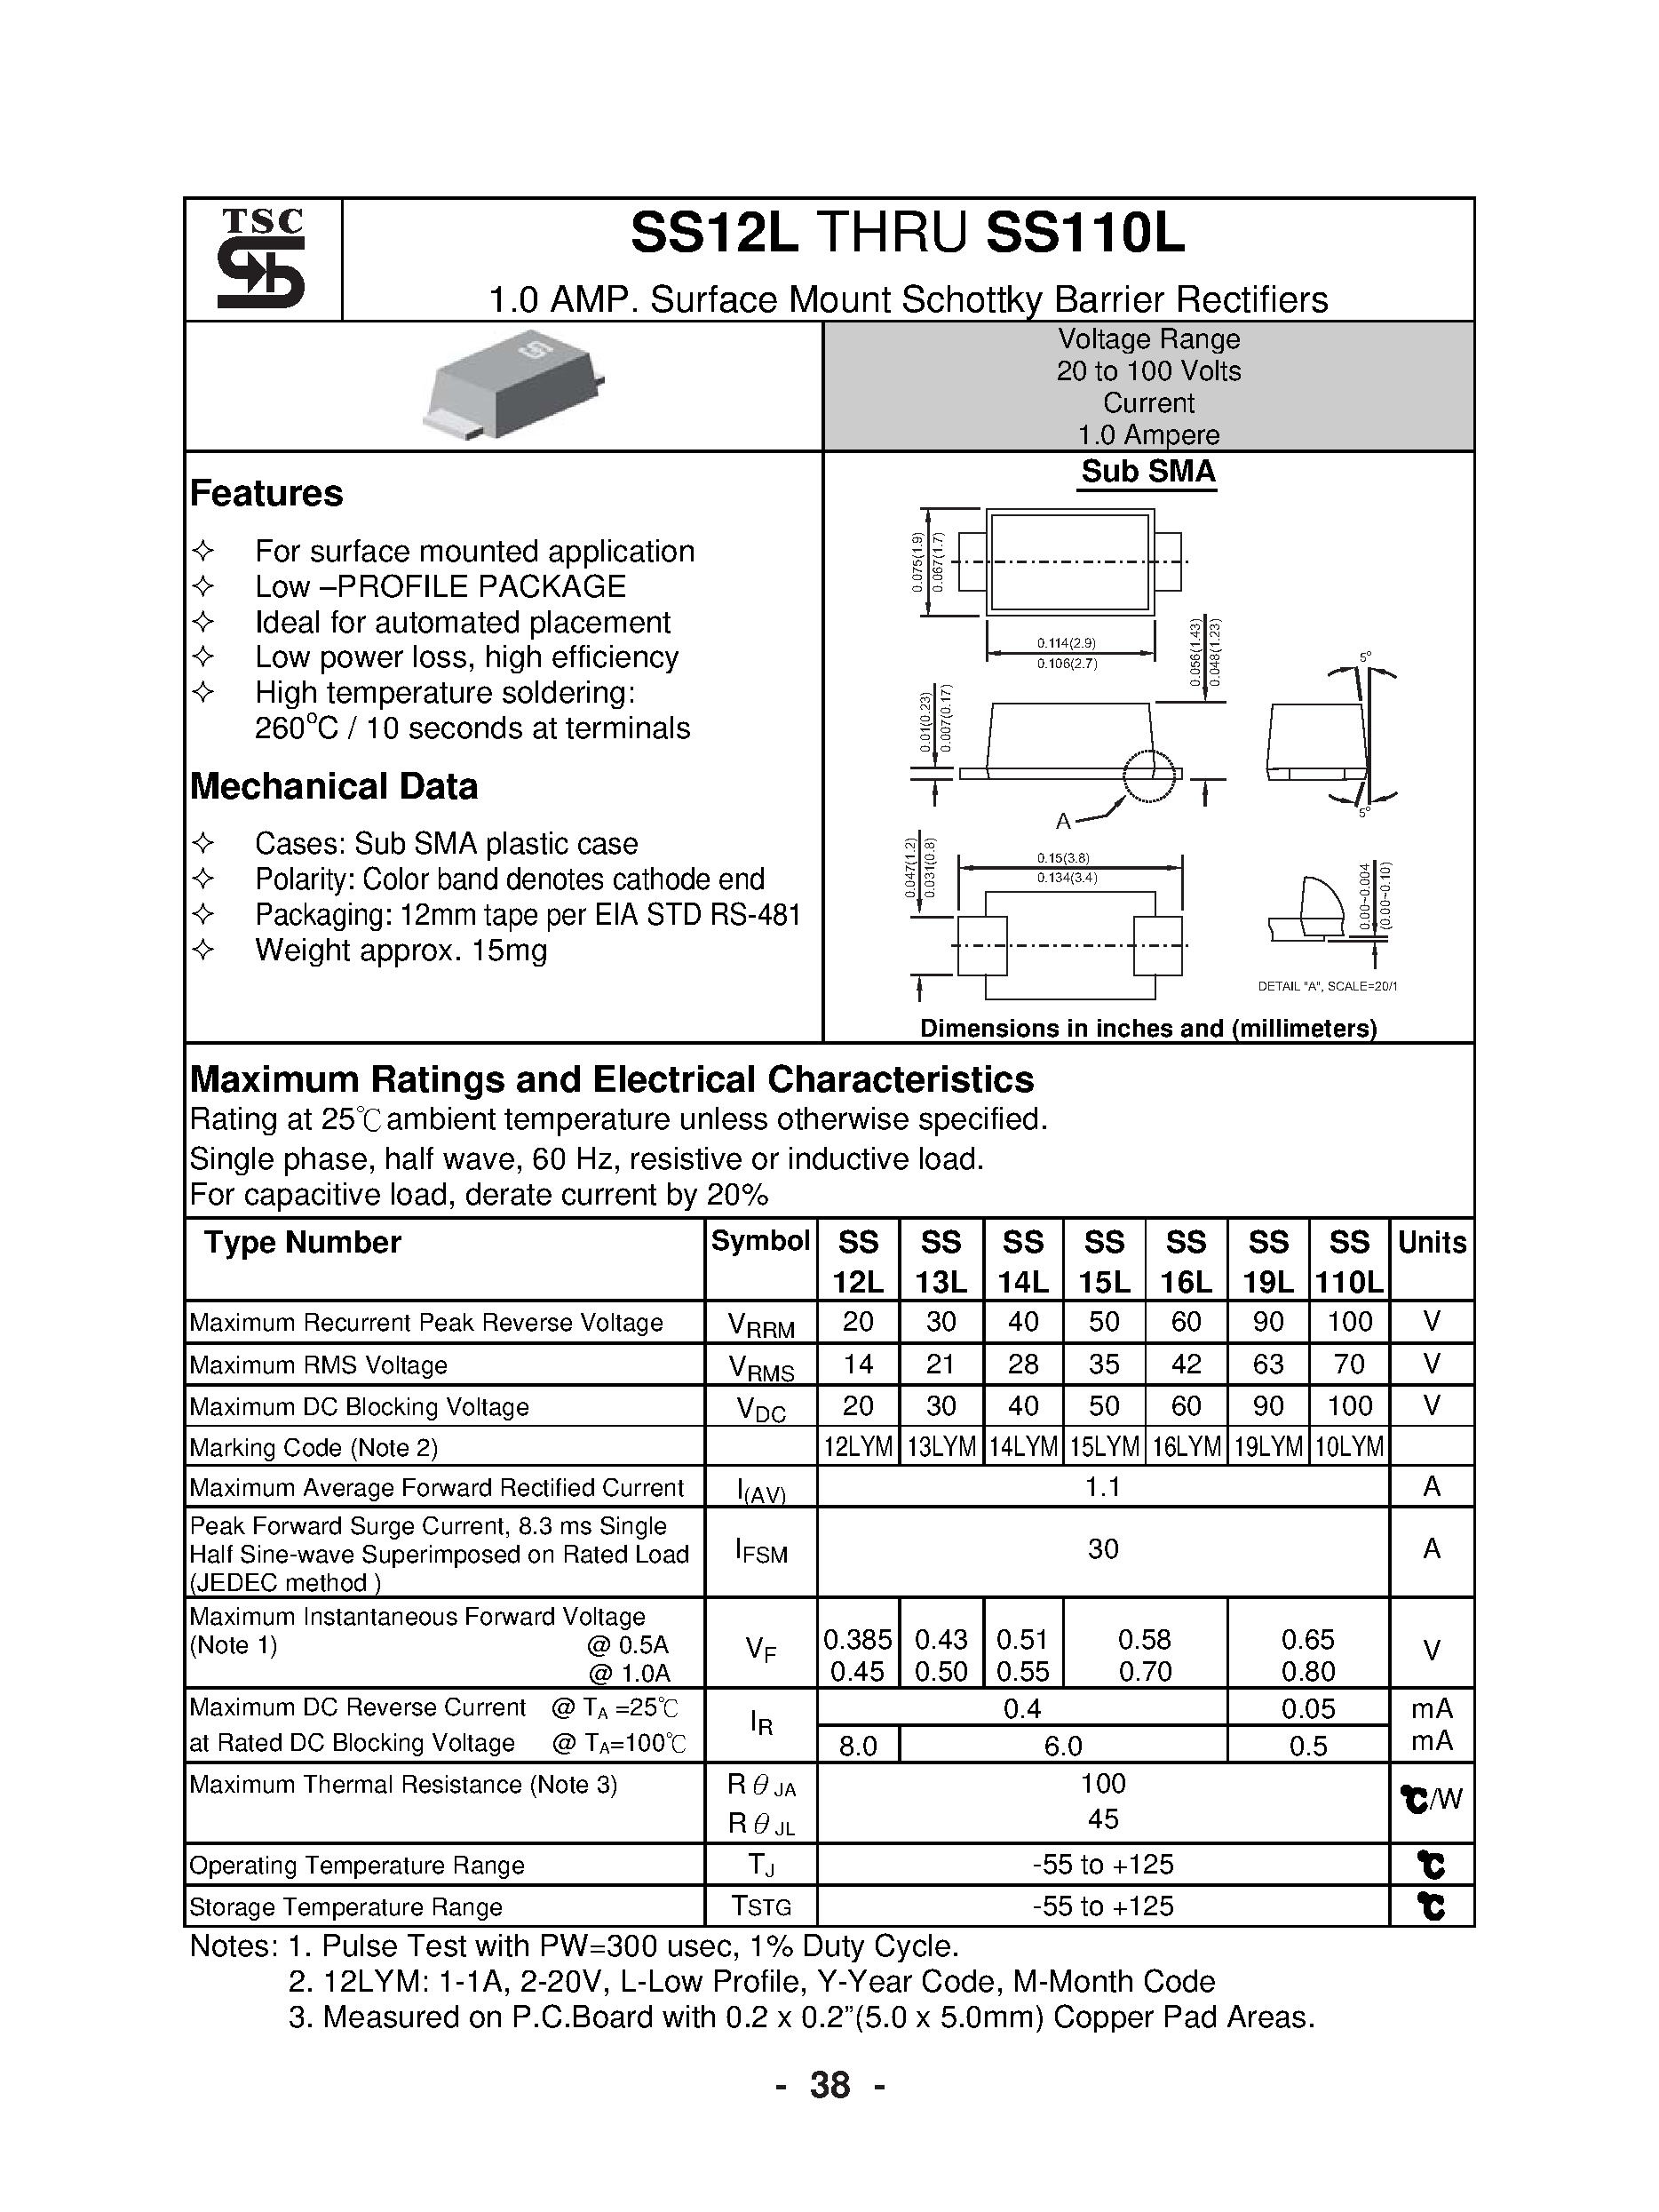 Datasheet SS110L - (SS12L - SS110L) 1.0 AMP Surface Mount Schottky Barrier Rectifiers page 1